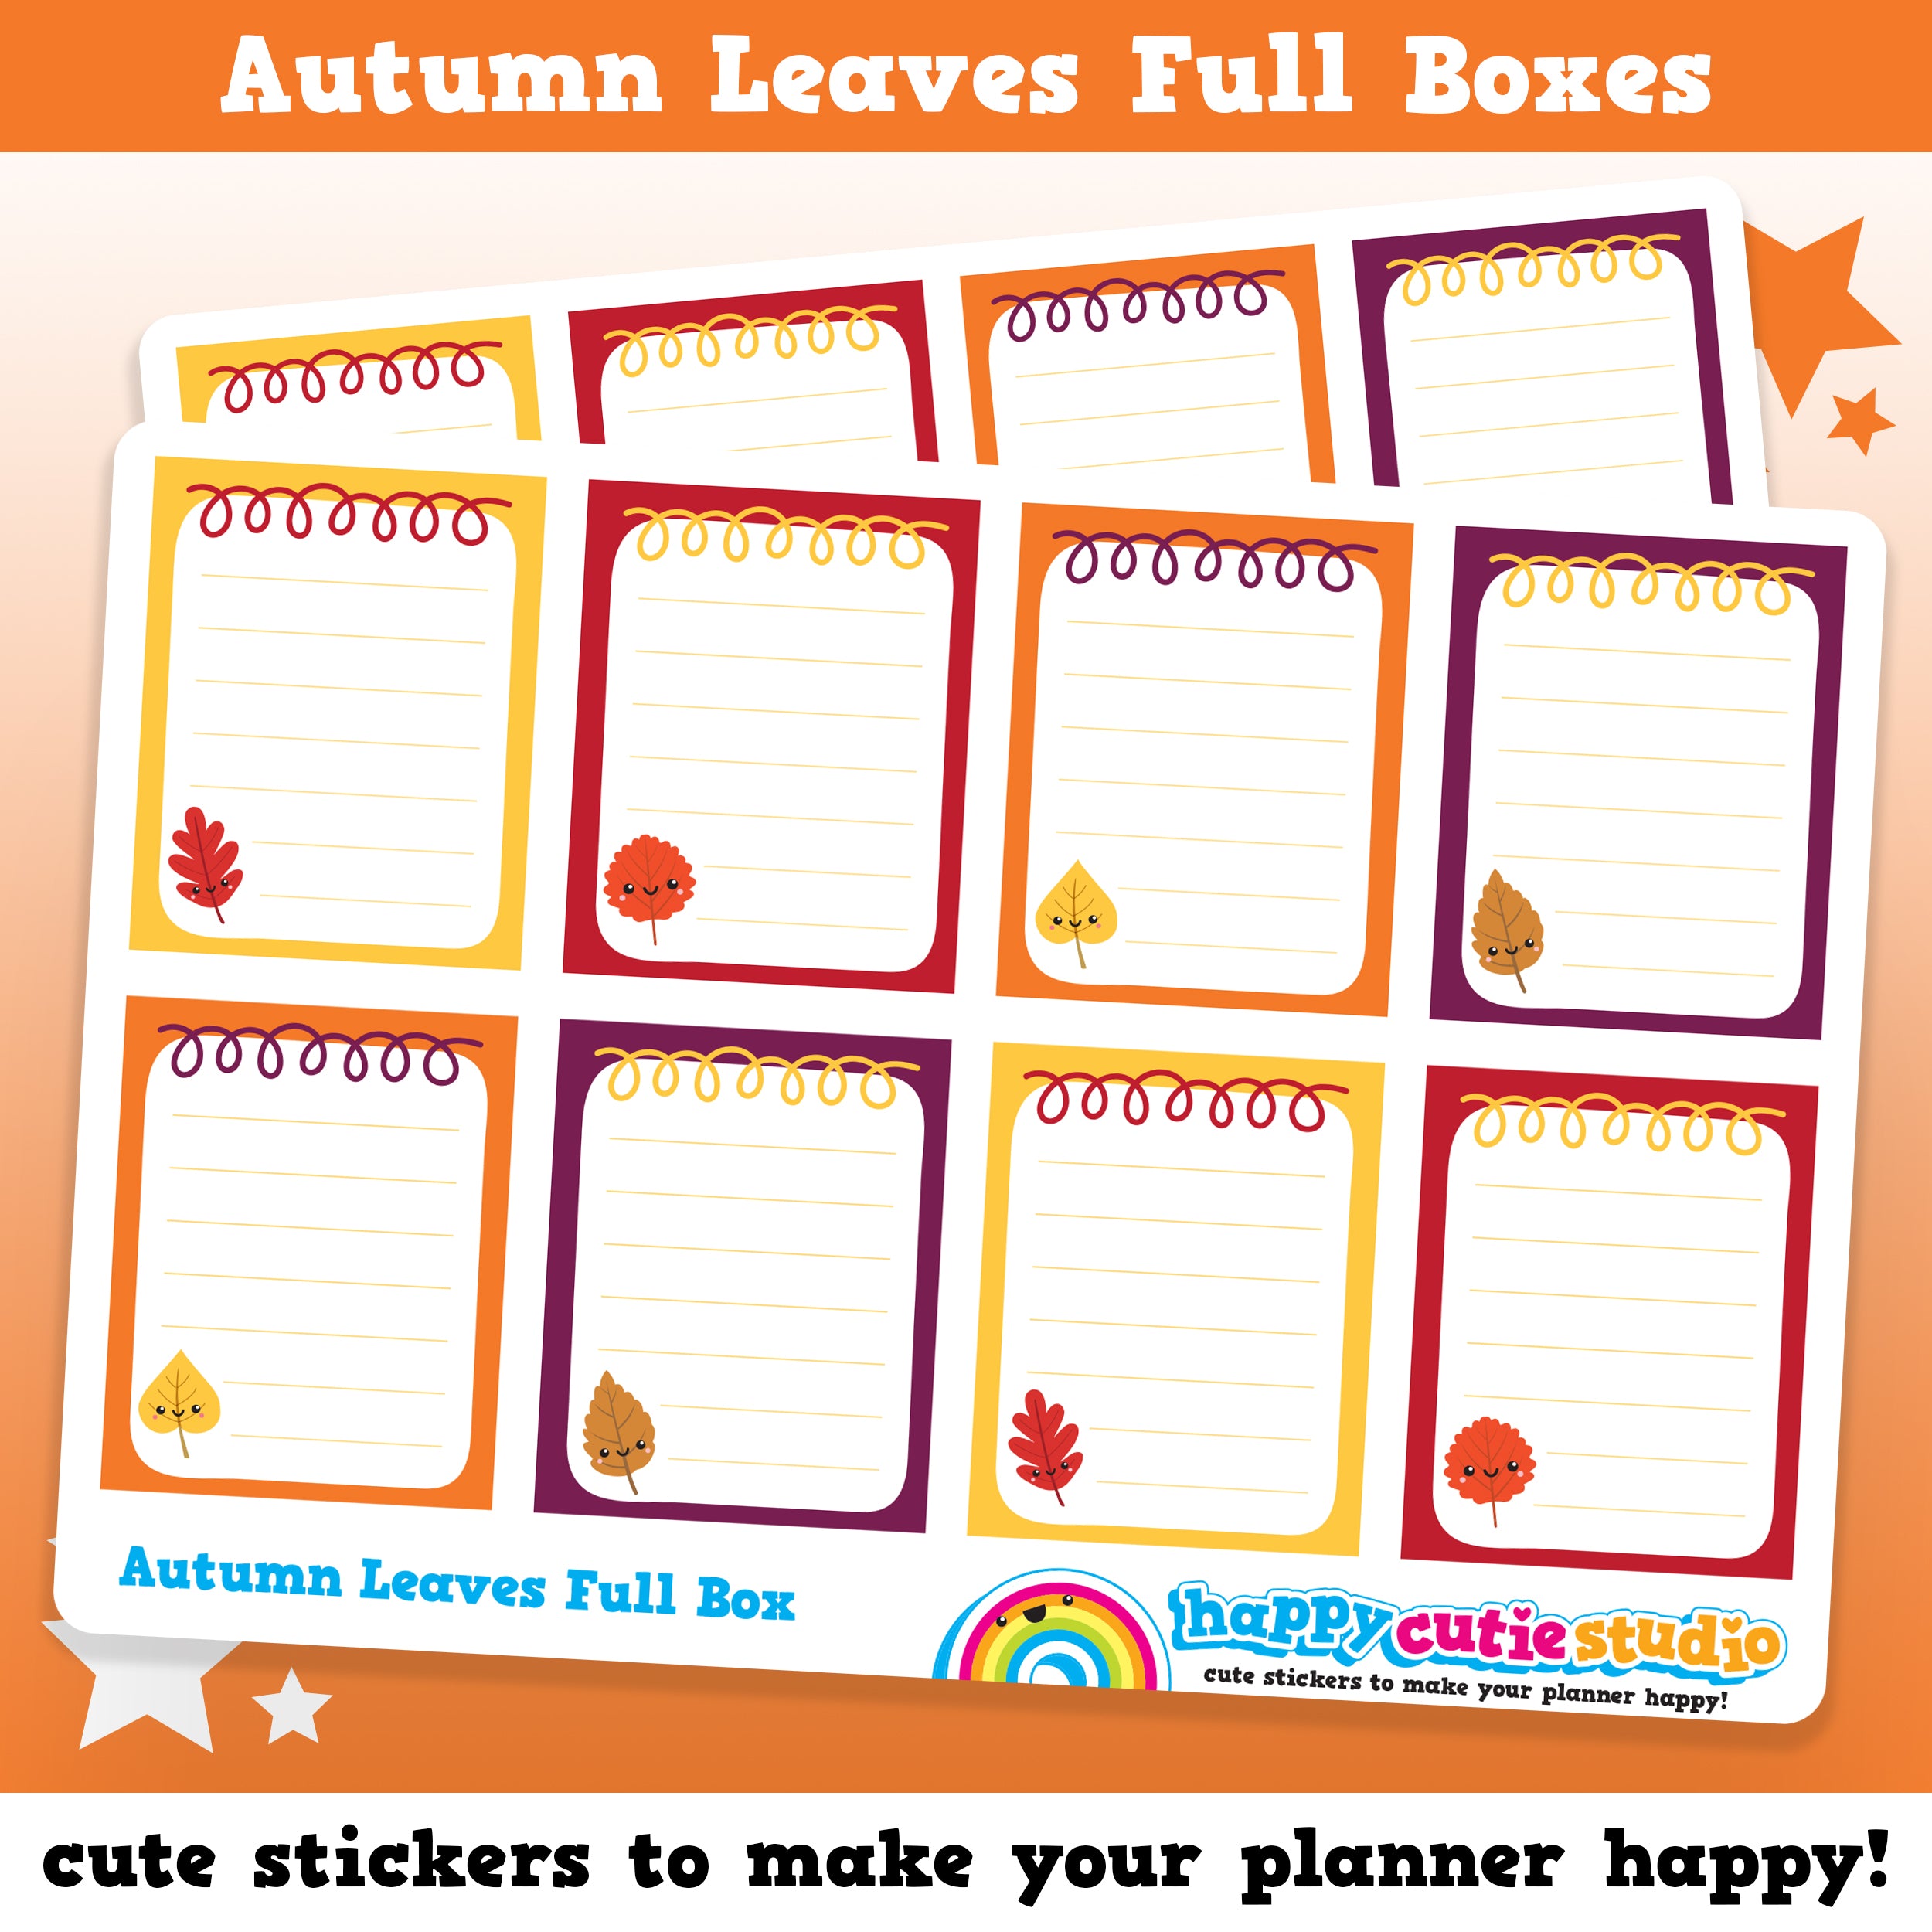 8 Cute Autumnal Leaves Half Box/Functional/Practical Planner Stickers